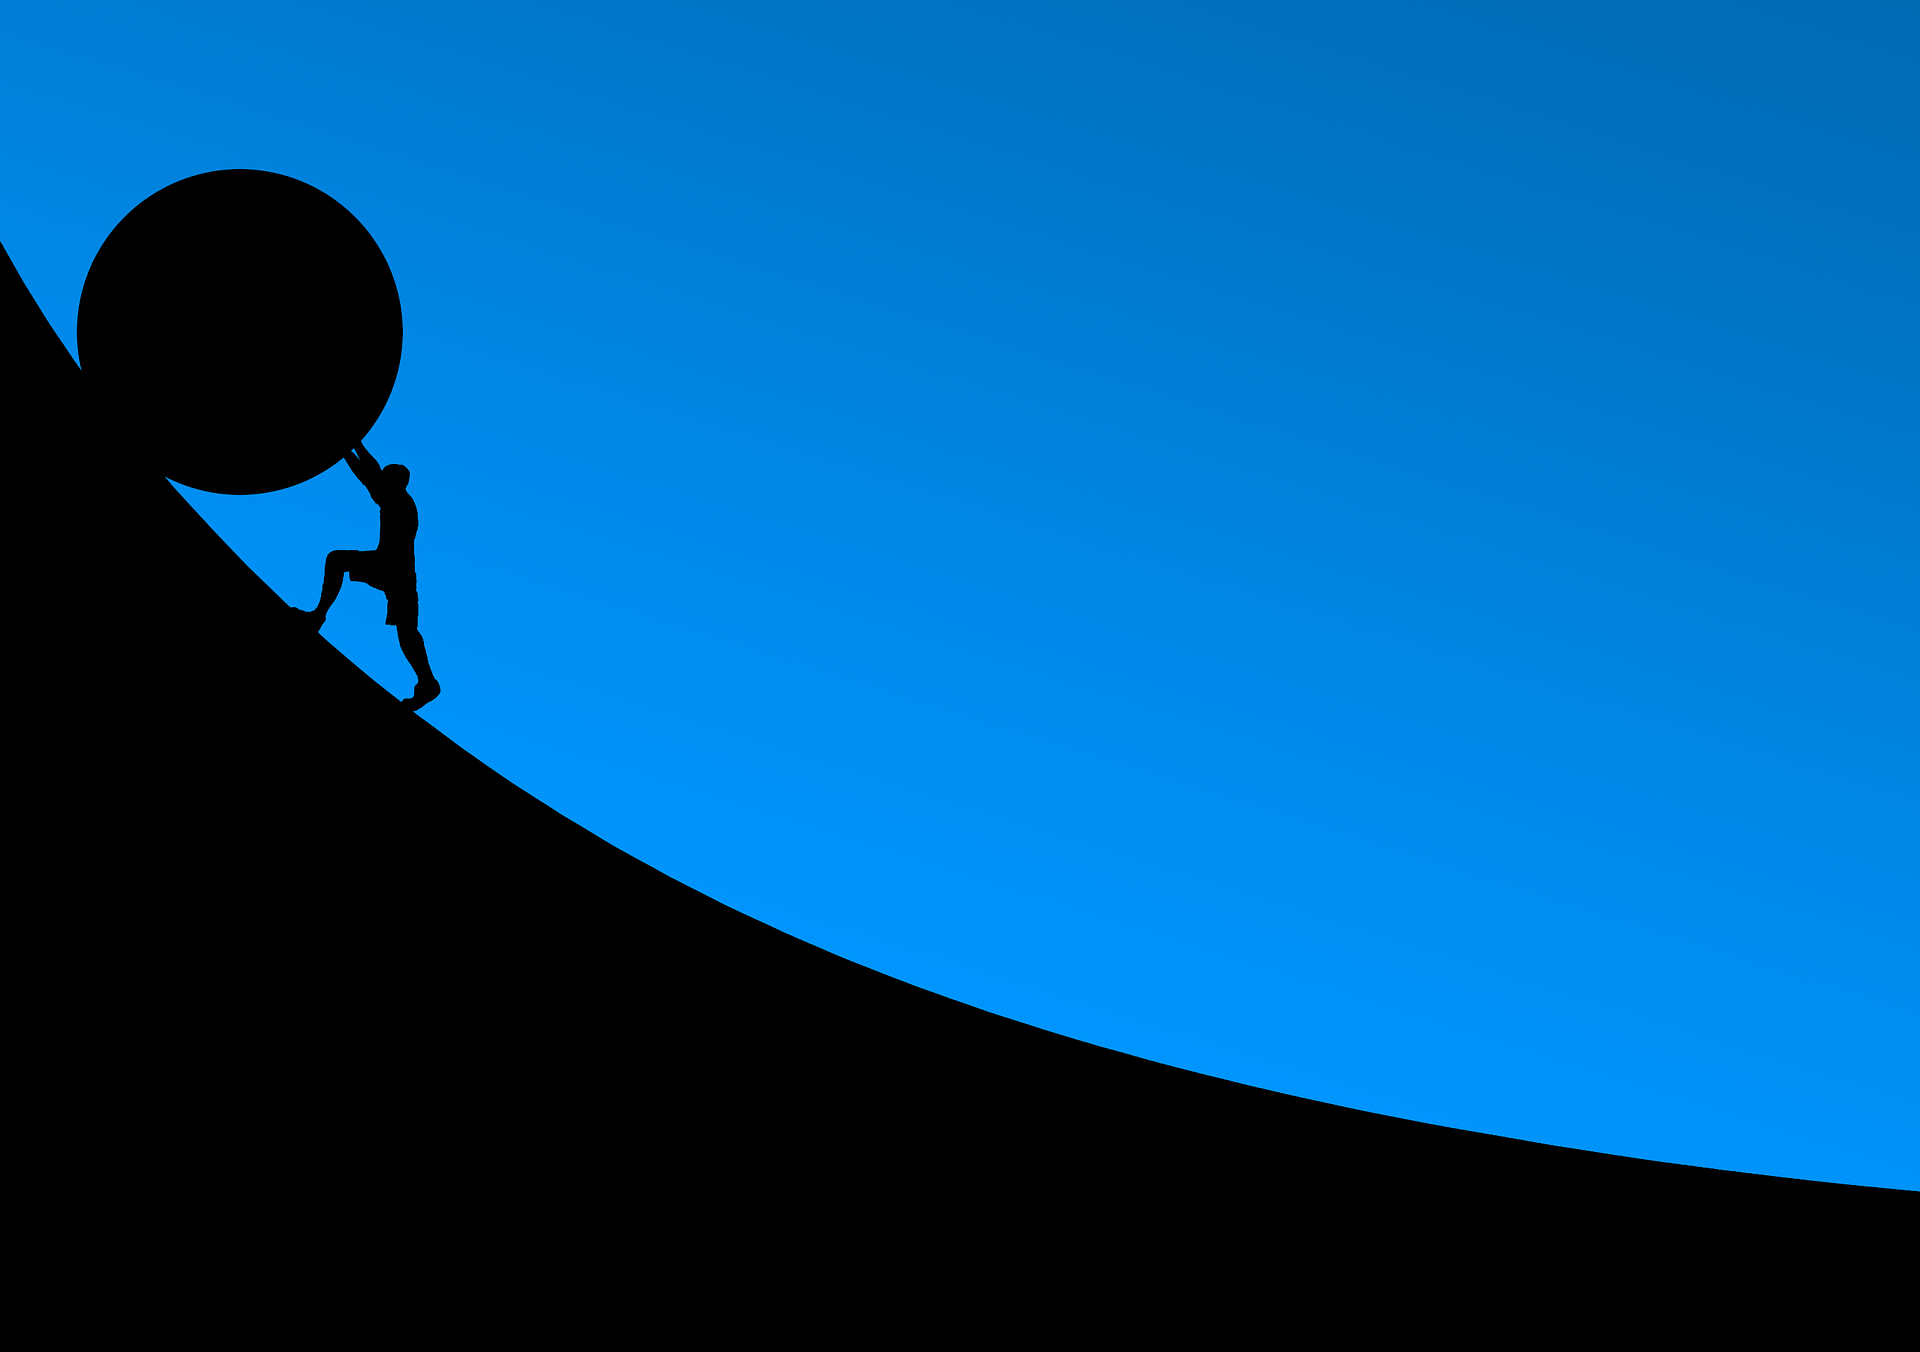 A man pushing a ball up a hill with a blue background